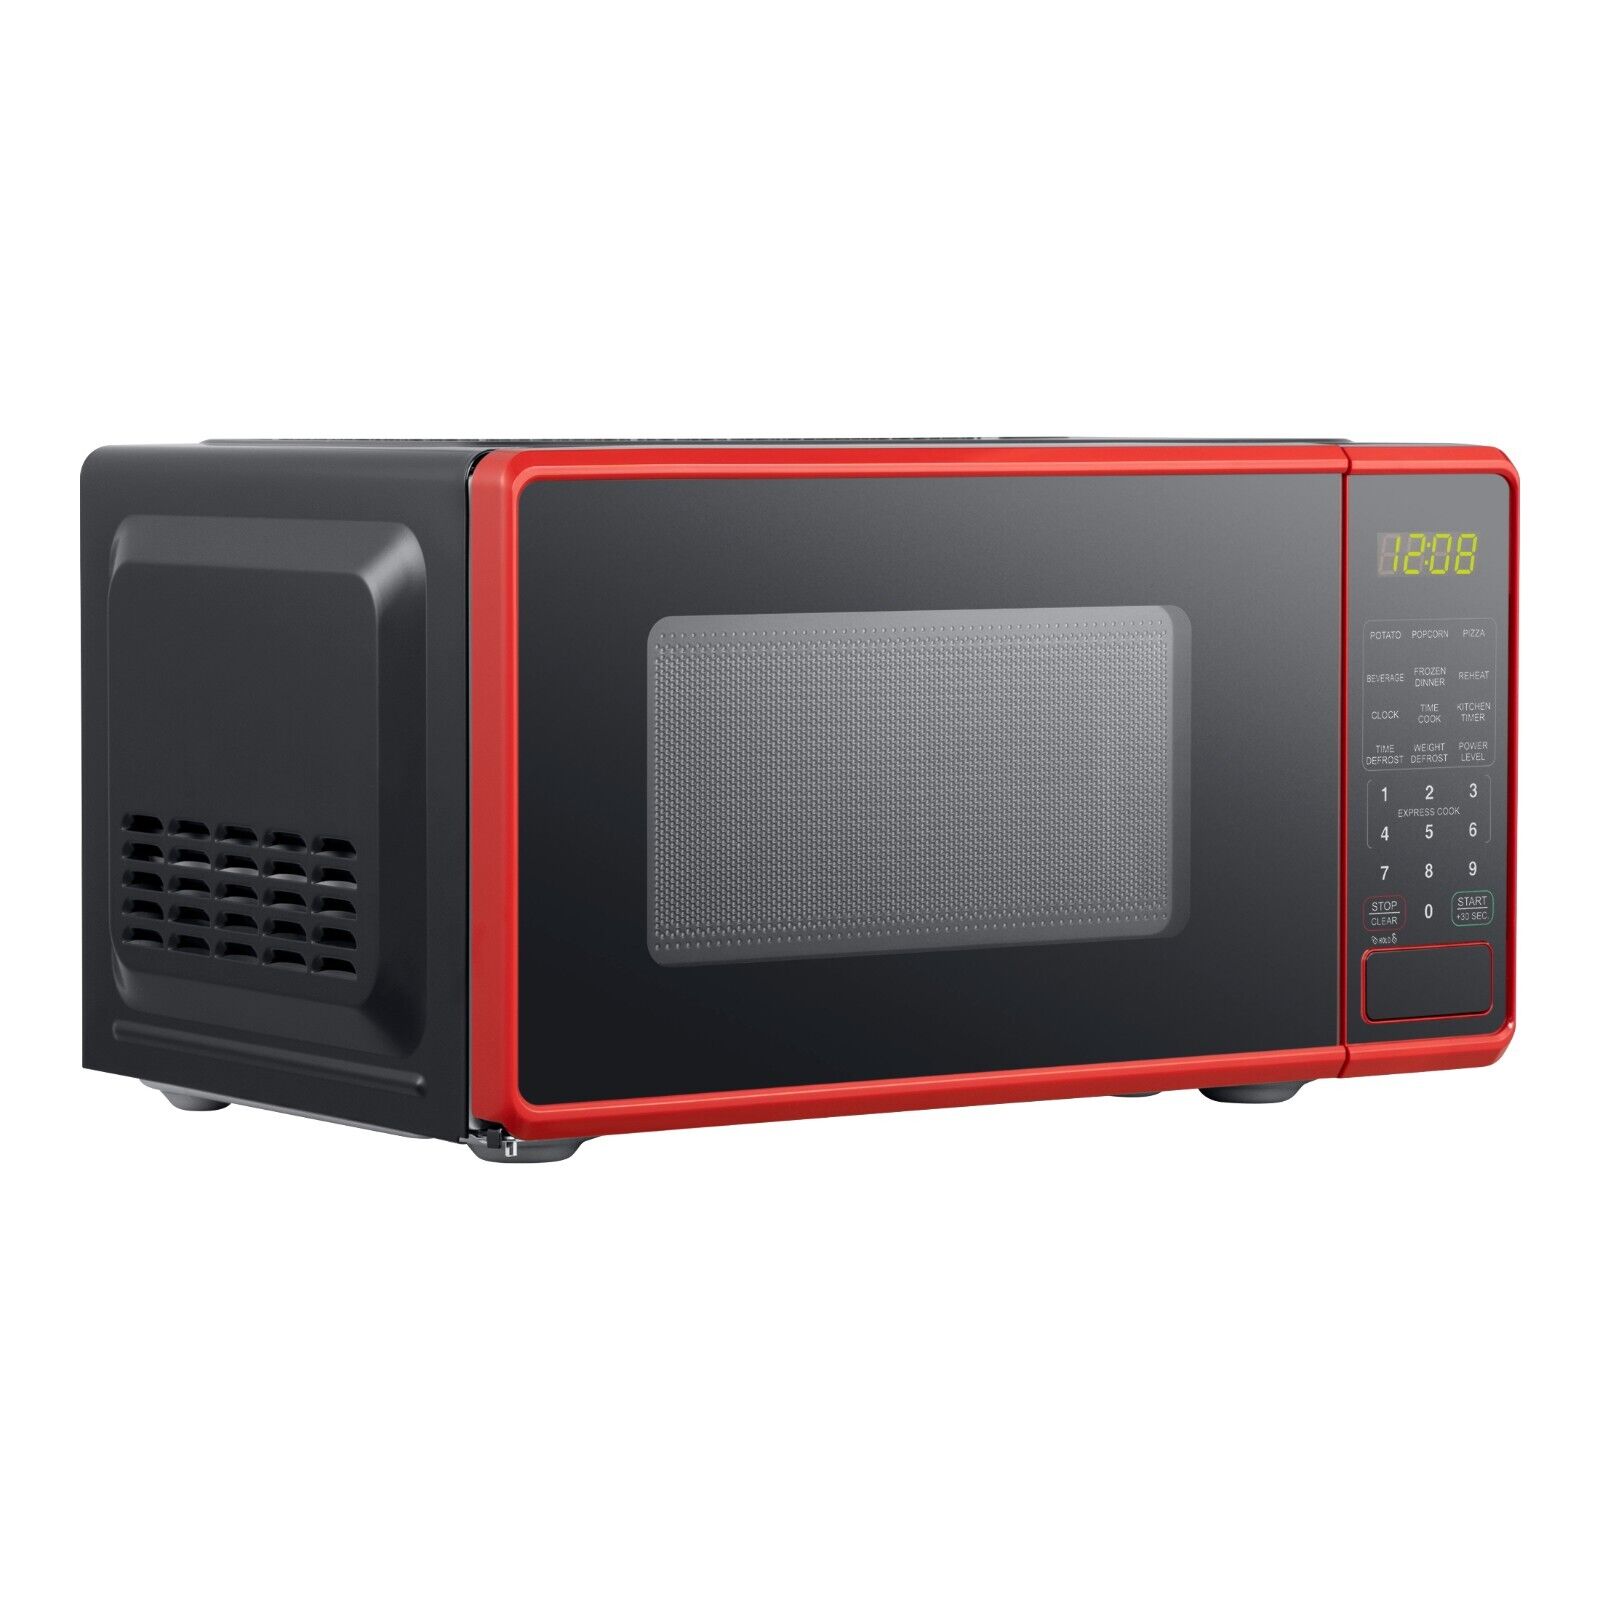 0.7 Cu ft Compact Microwave Oven Countertop Small 700W Cooking Red Microwave US